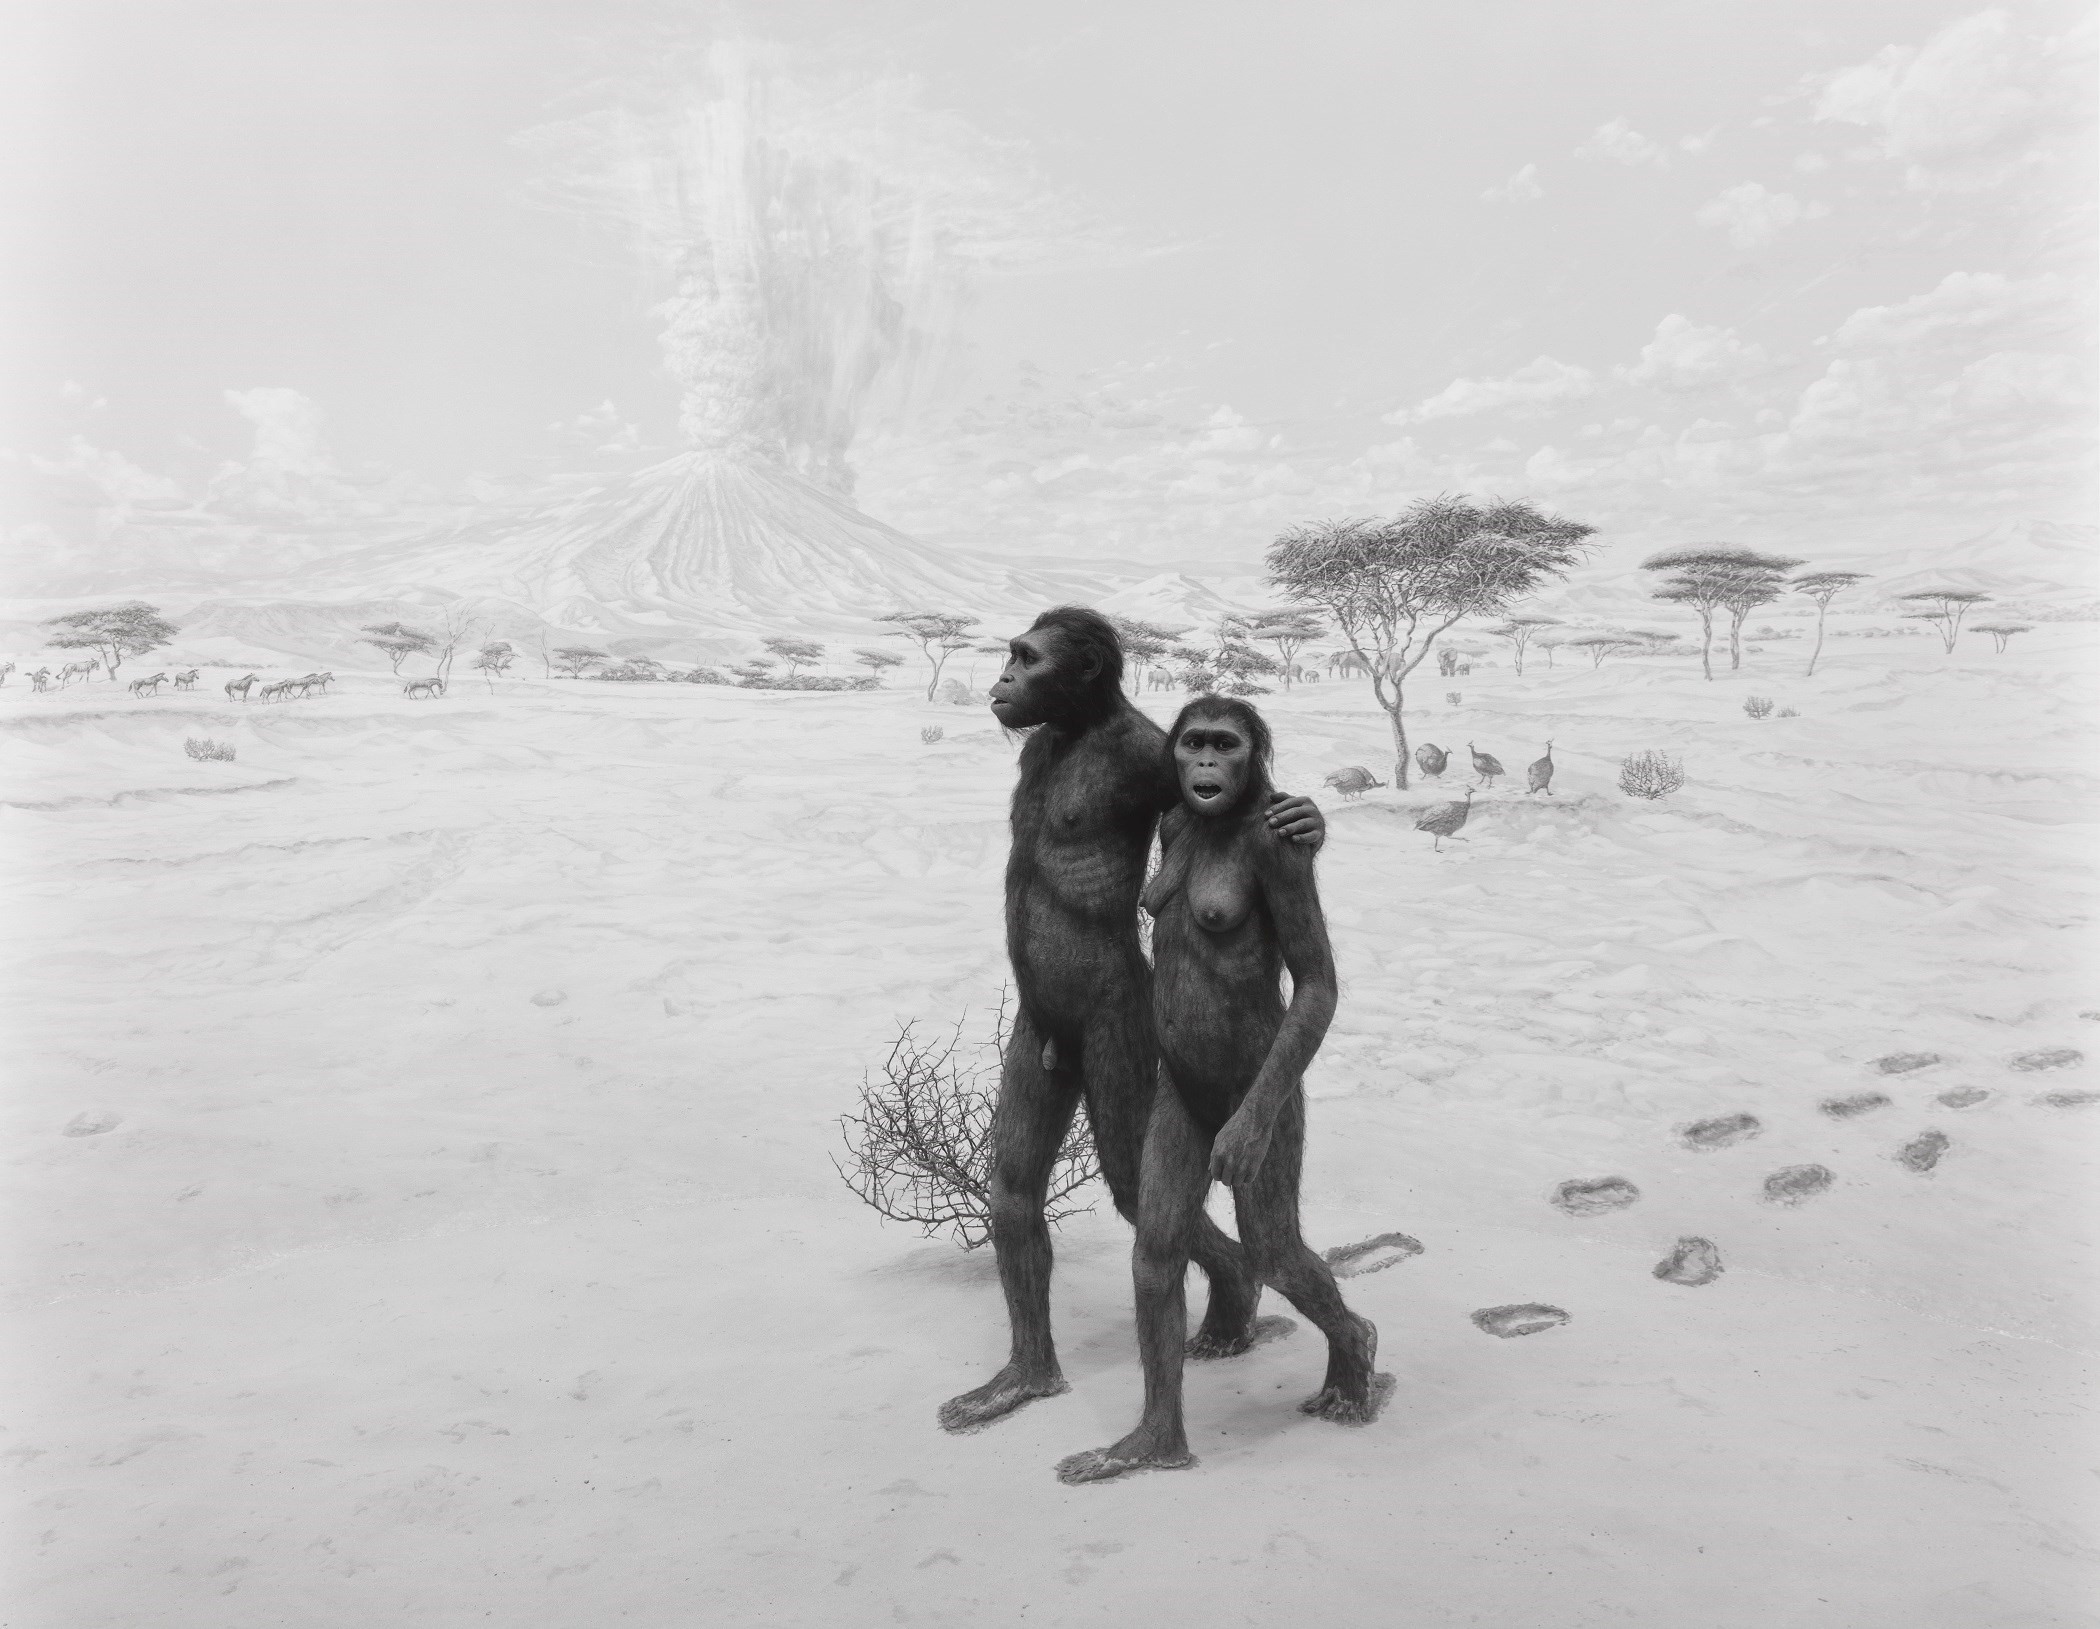 Hiroshi Sugimoto, the Photographer Visualising Our Distant Past